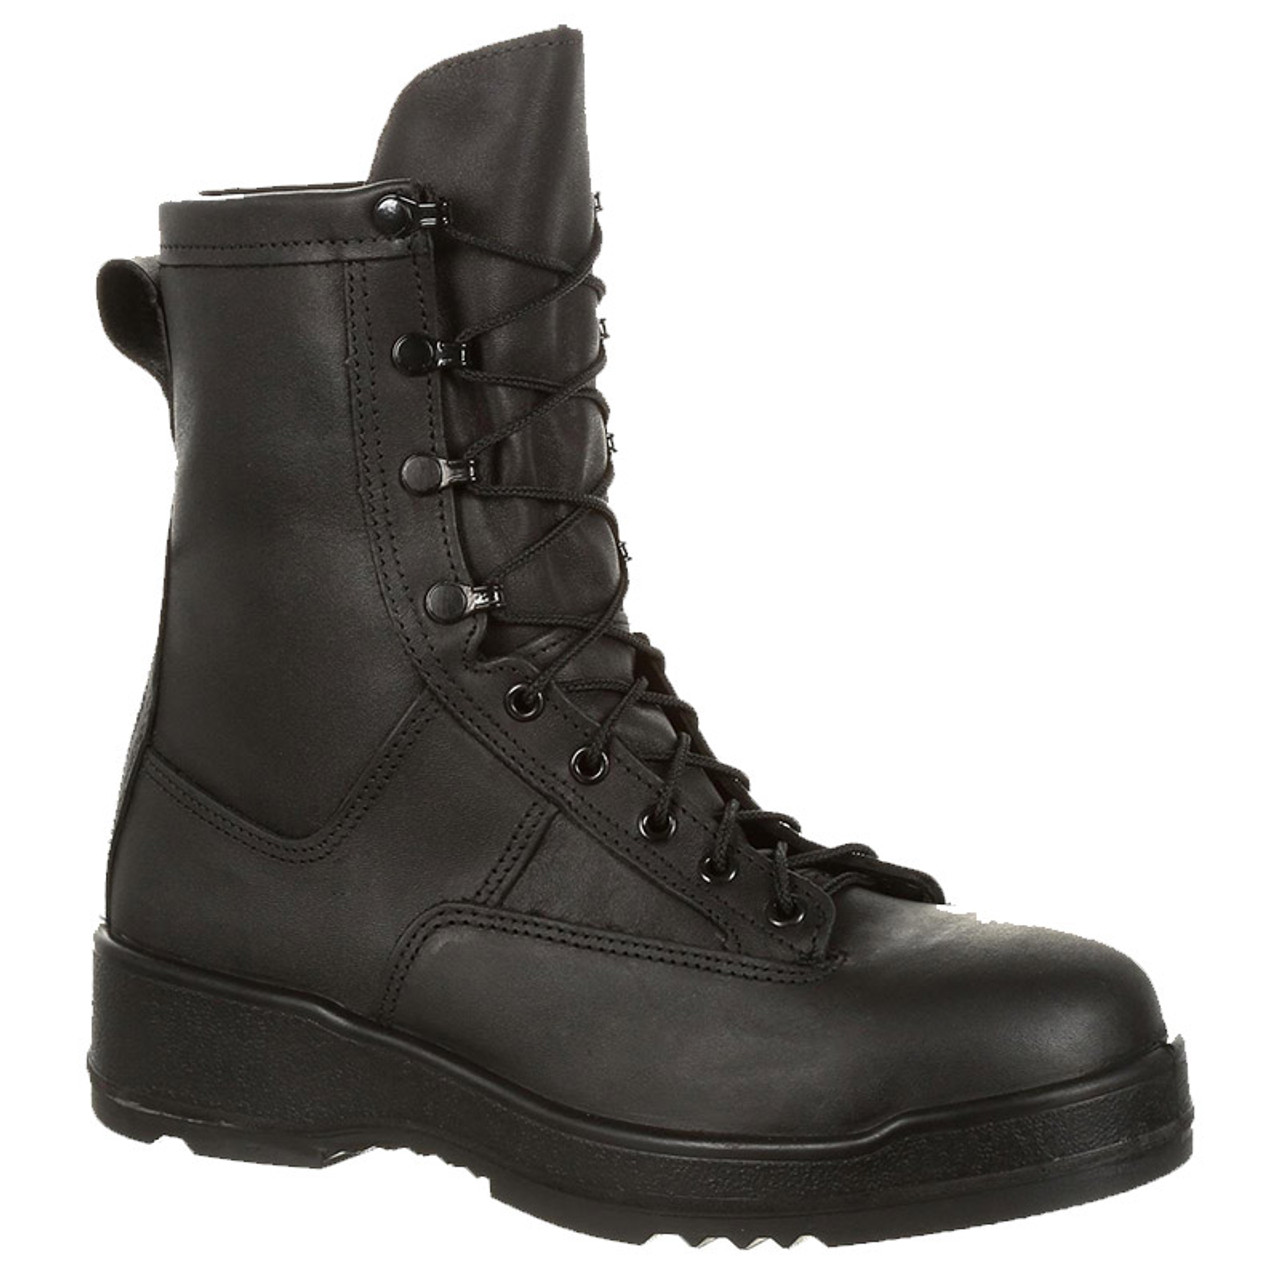 military style steel toe boots